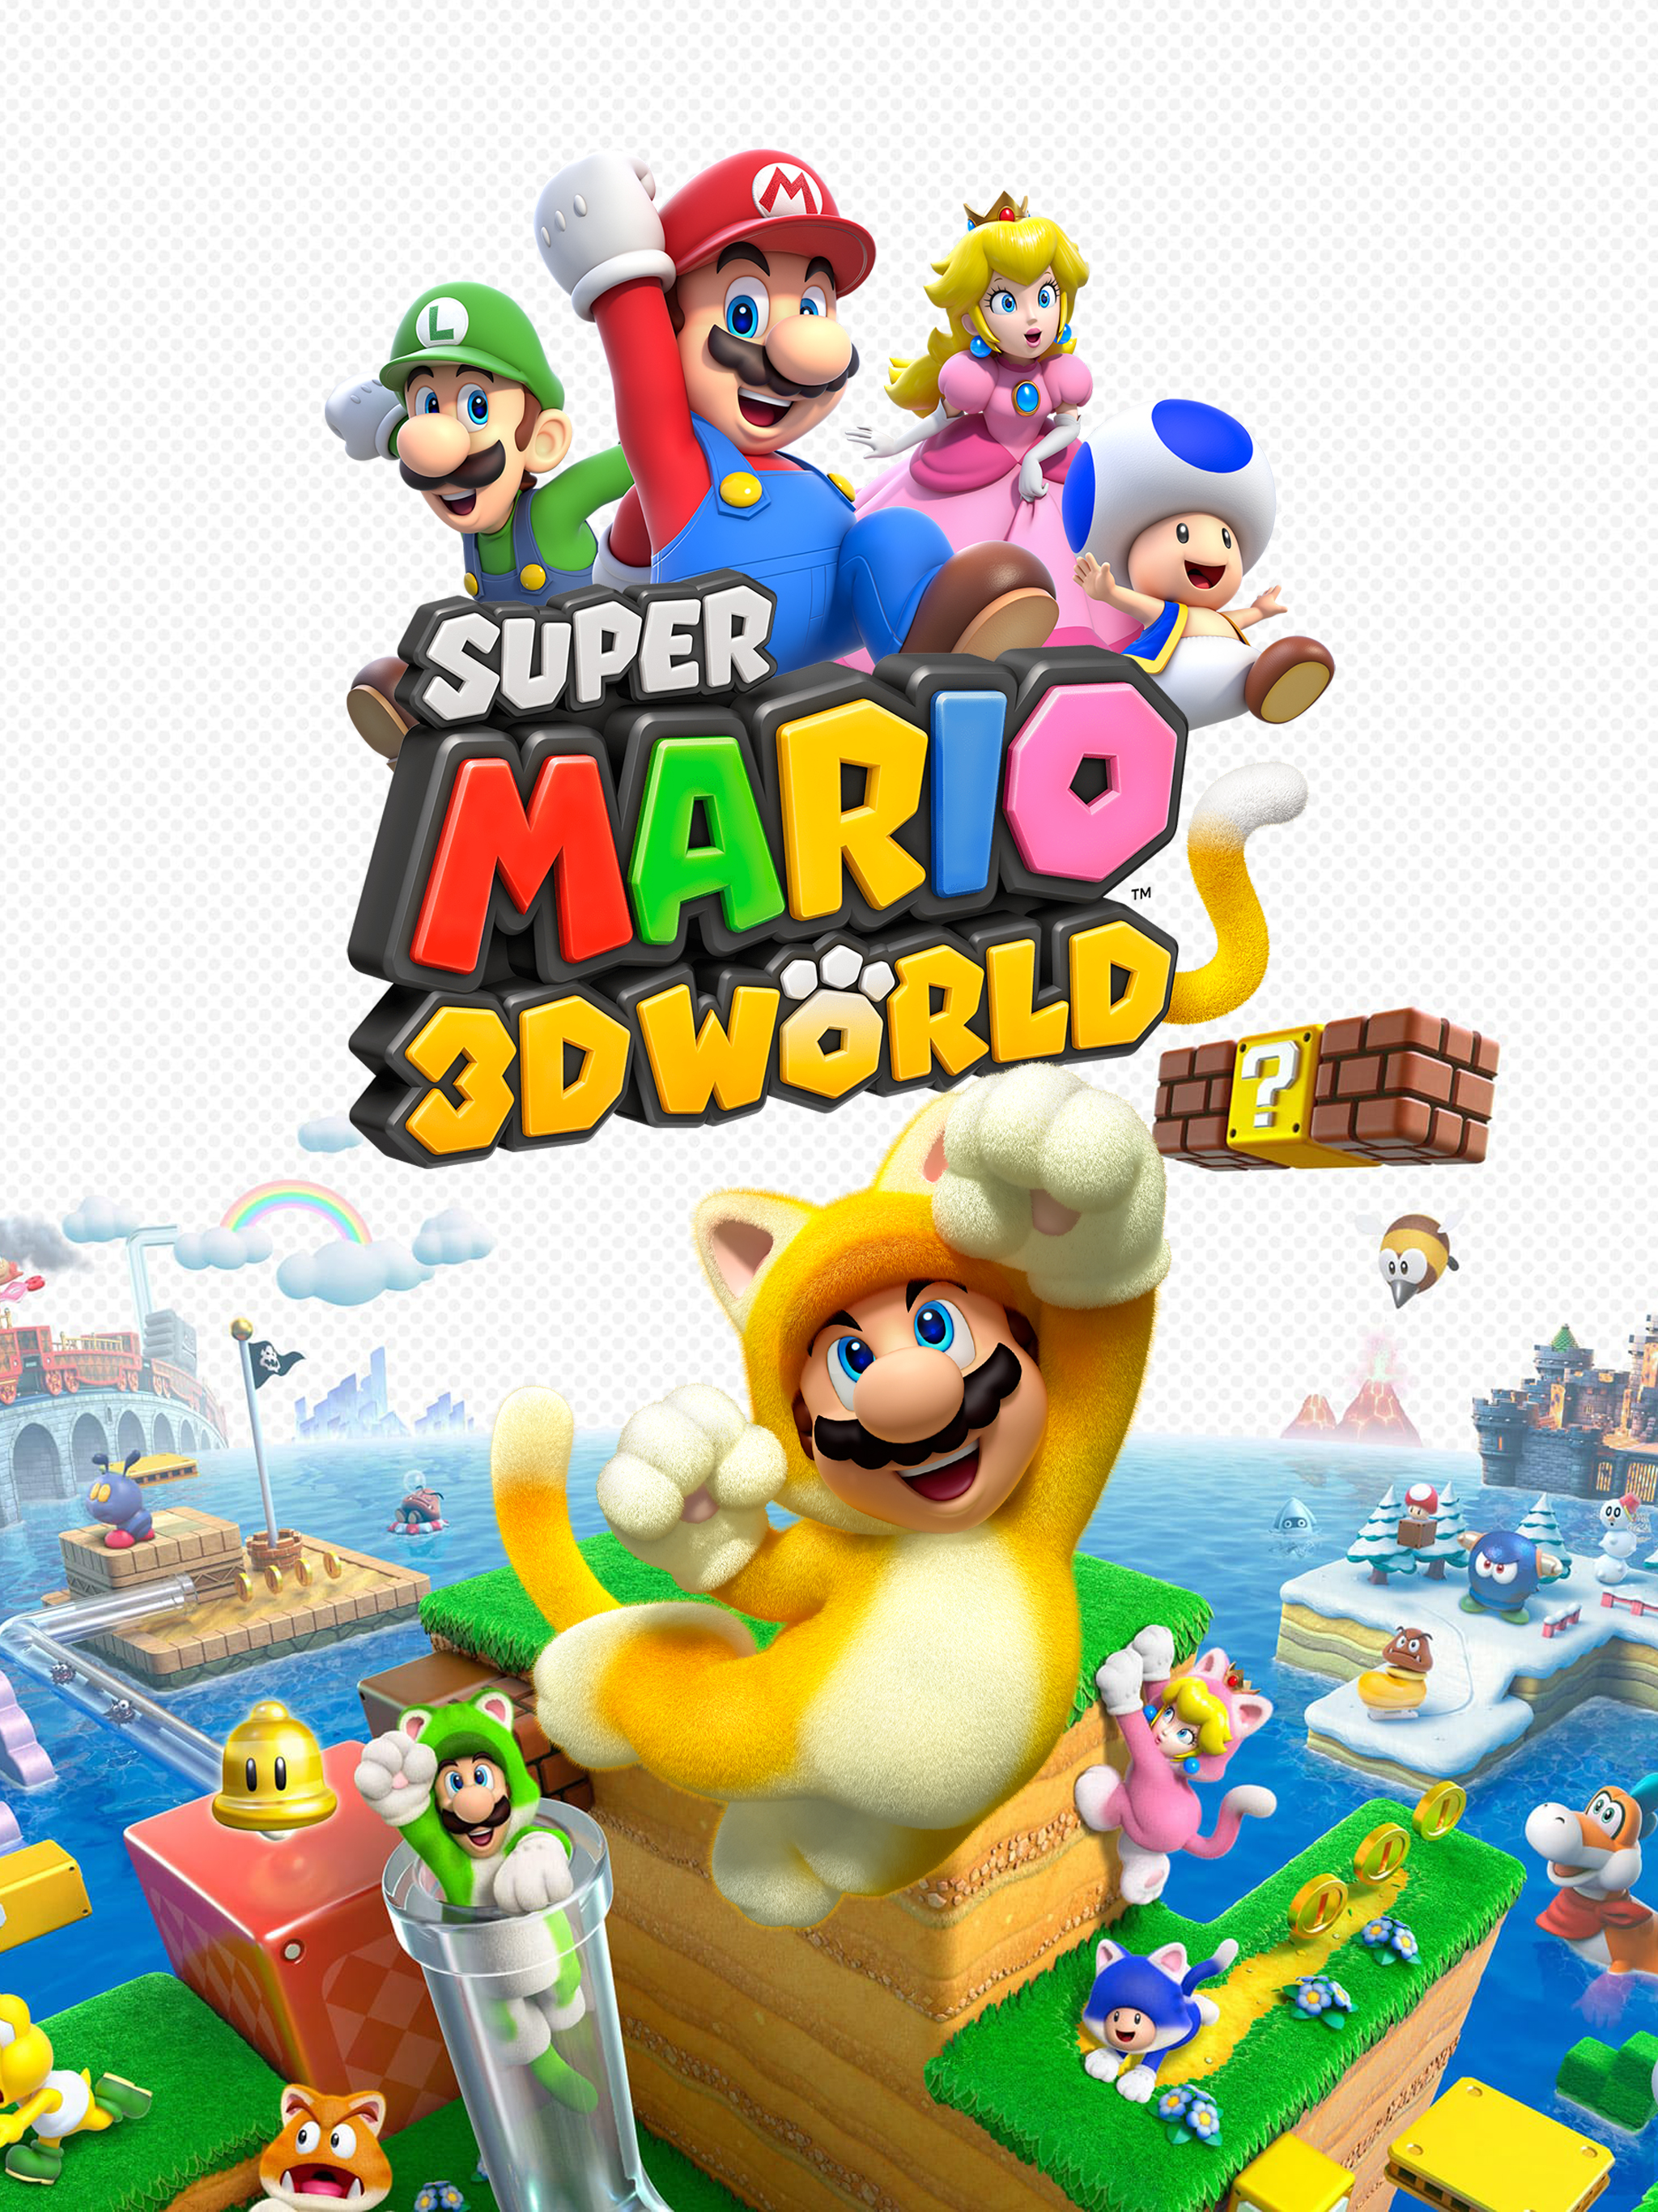 Super Mario 3D World - Cover Art Wallpaper - Cat with Monocle